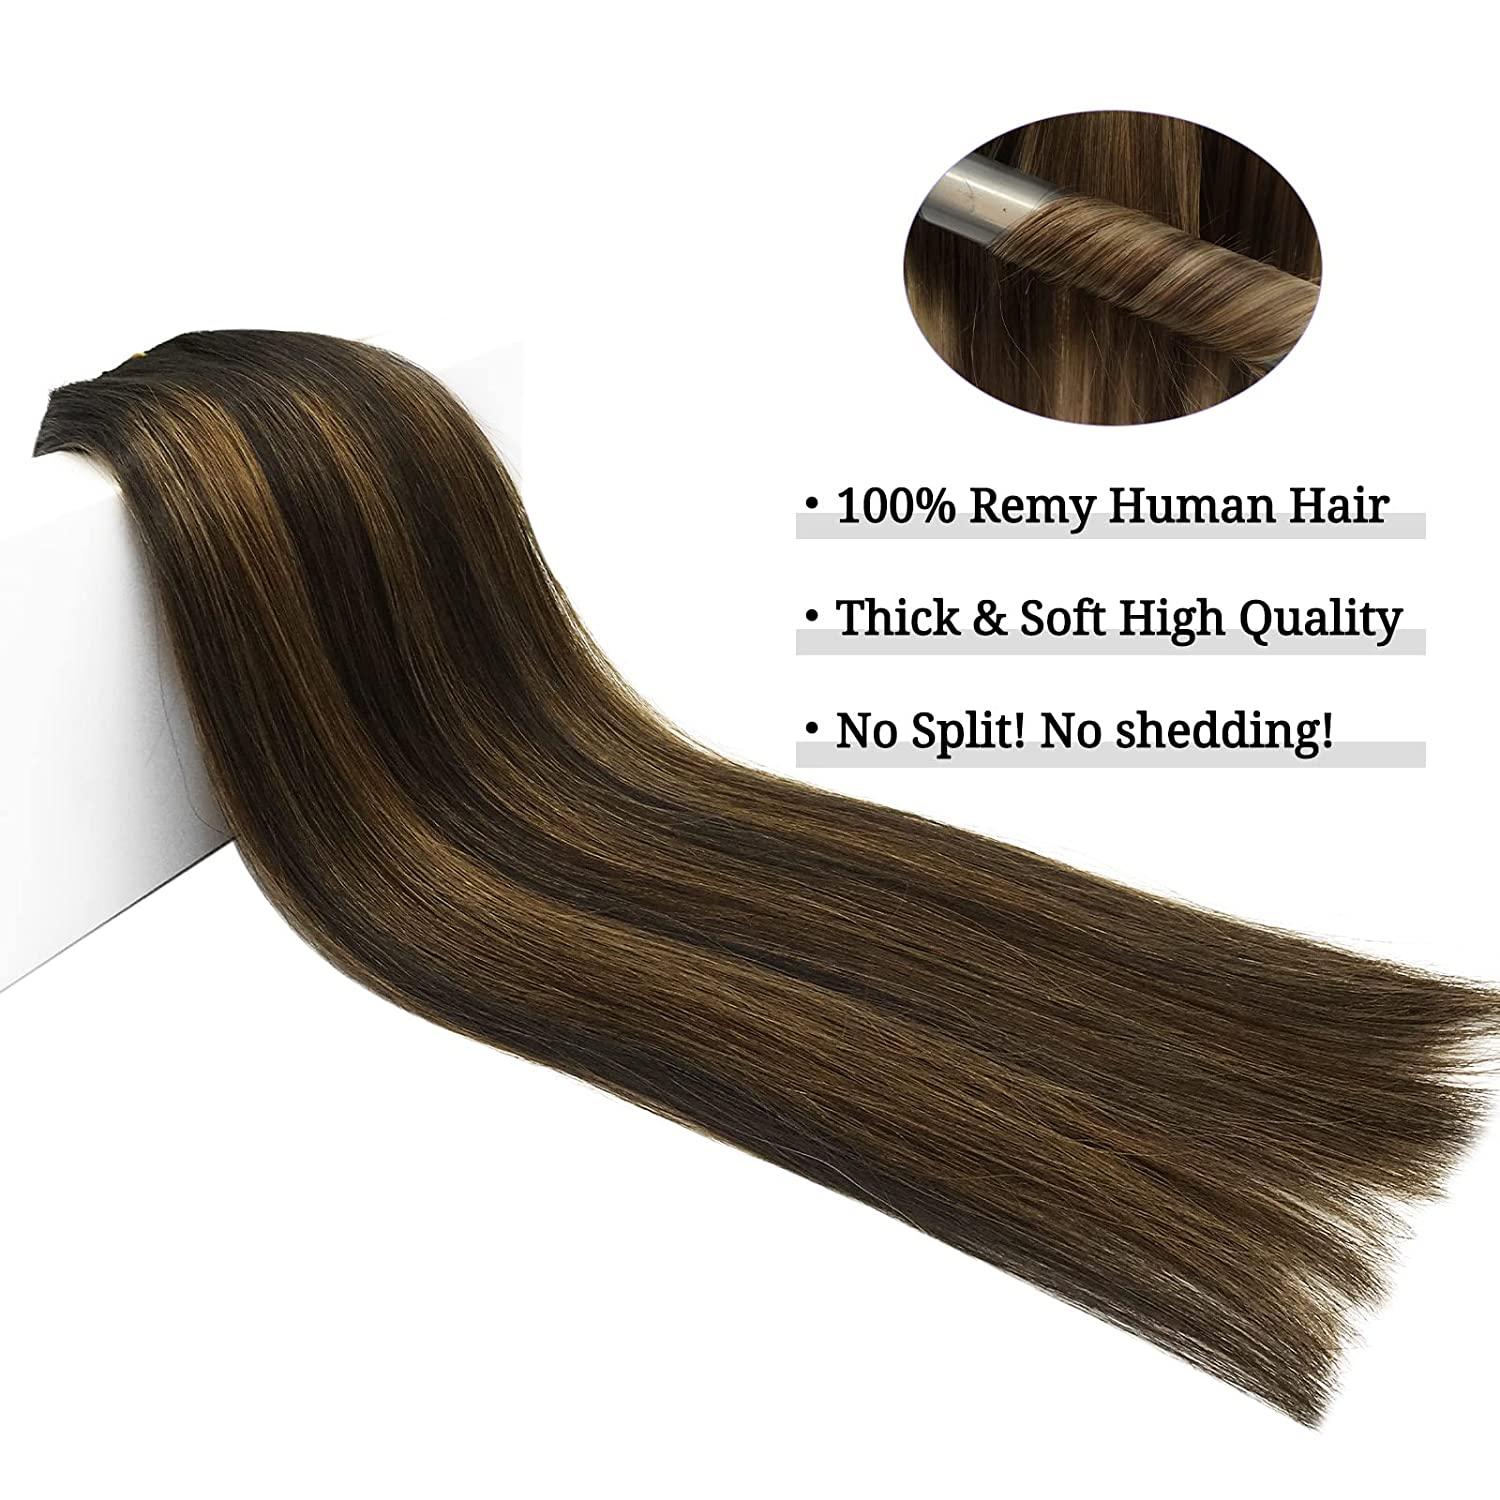 Hair Extensions Real Human Hair, Balayage Dark Brown to Chestnut